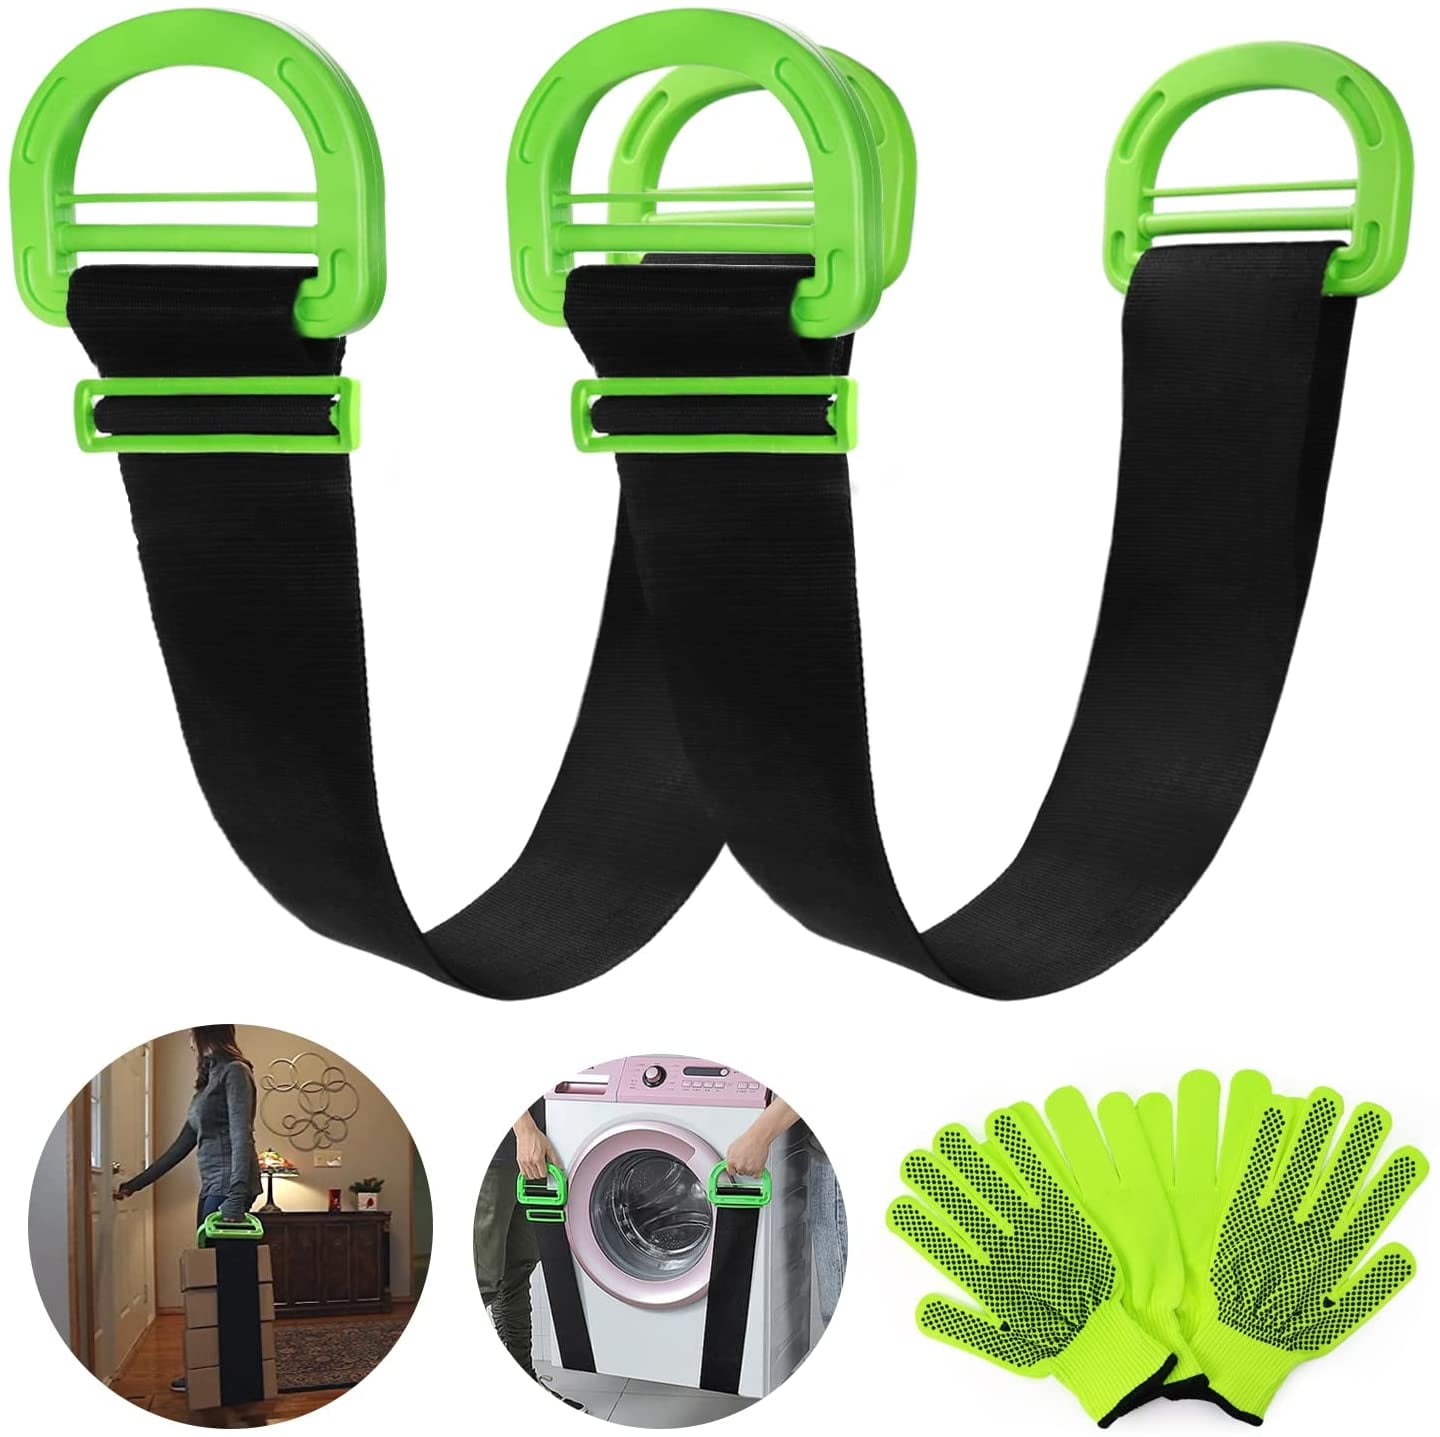 Appliances for Furniture Moving Strap with Non-Slip Silicone for 2-Person and Adjustable Lifting Moving Straps for 1 Person Mattresses or Heavy Objects Moving Straps Lifting System Kit 